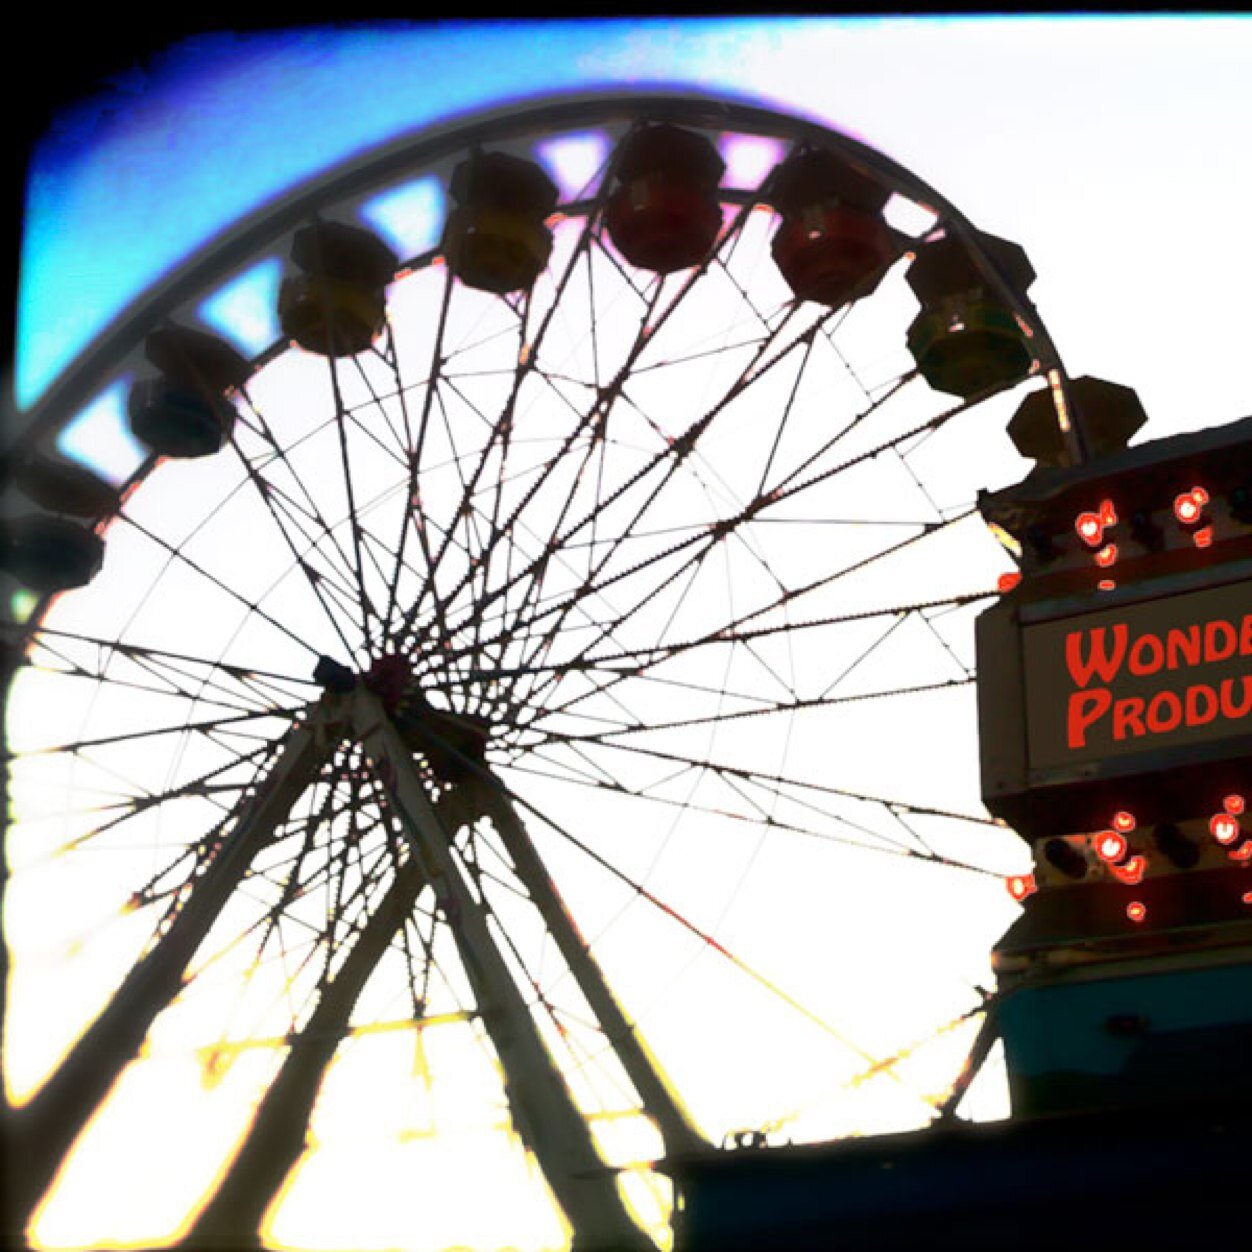 Film making fam at Wonder Wheel Productions: Rumblestrips, Knuckle Jack, The Shoot, Halfway to Zen, The Deeper You Dig, HELLBENDER, Where the Devil Roams!